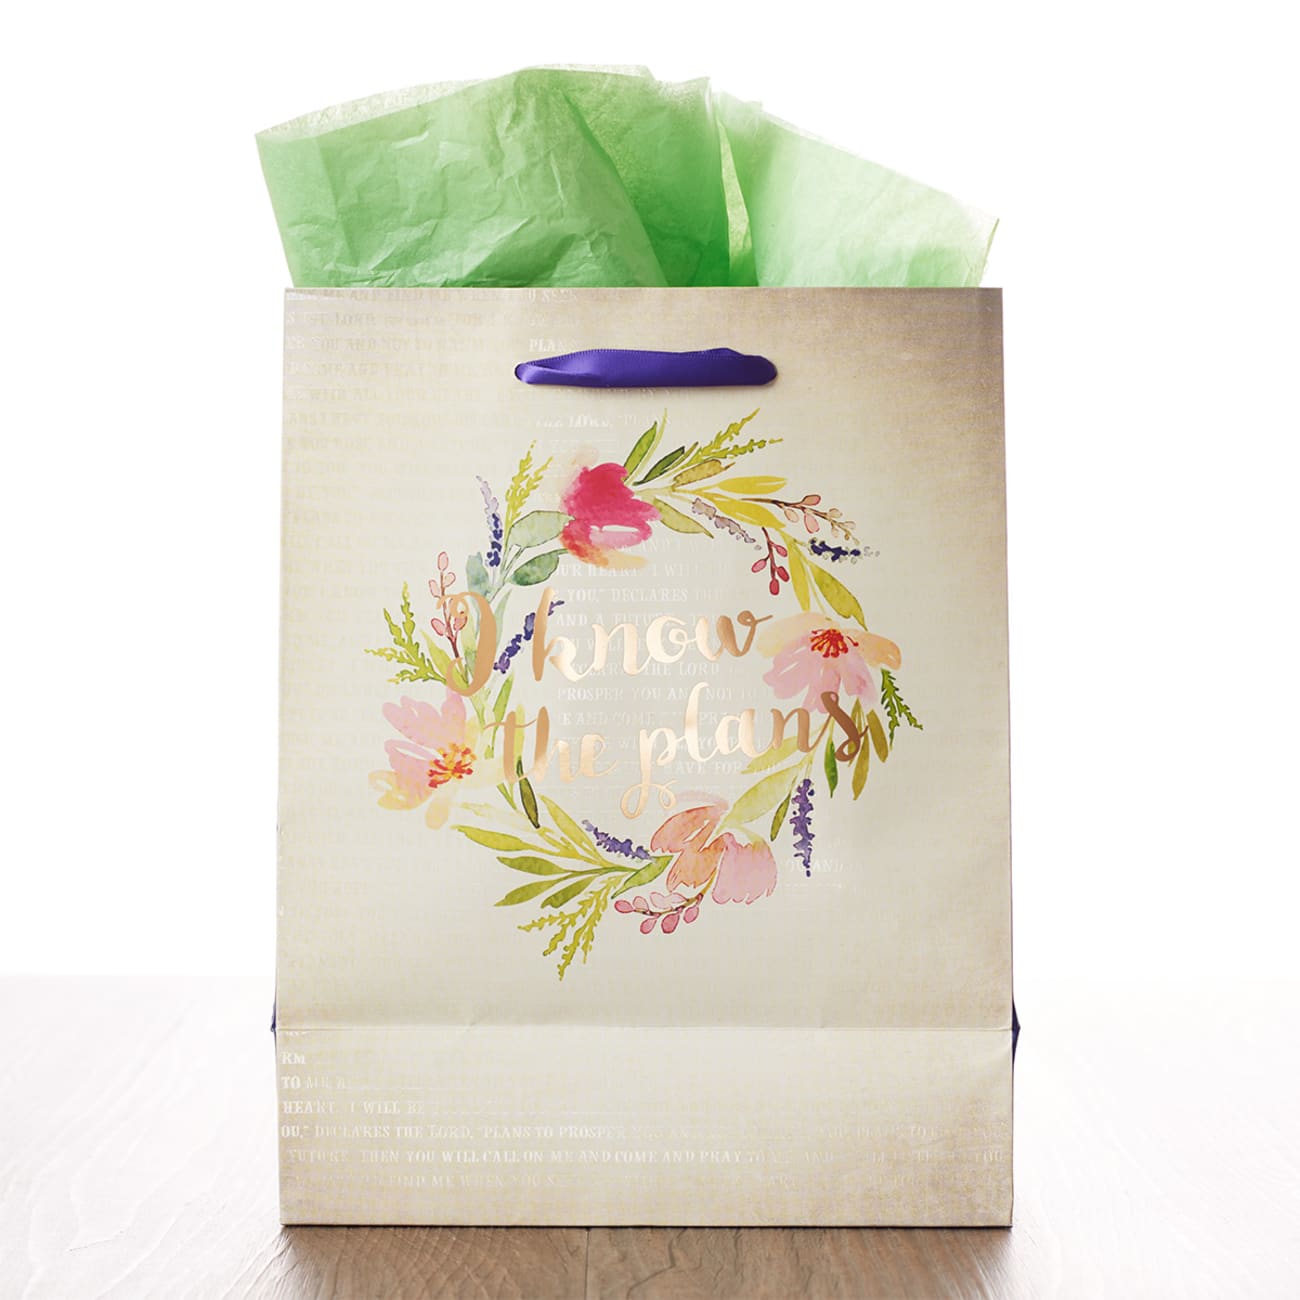 Gift Bag Medium: I Know the Plans (Colored Wreath) Stationery